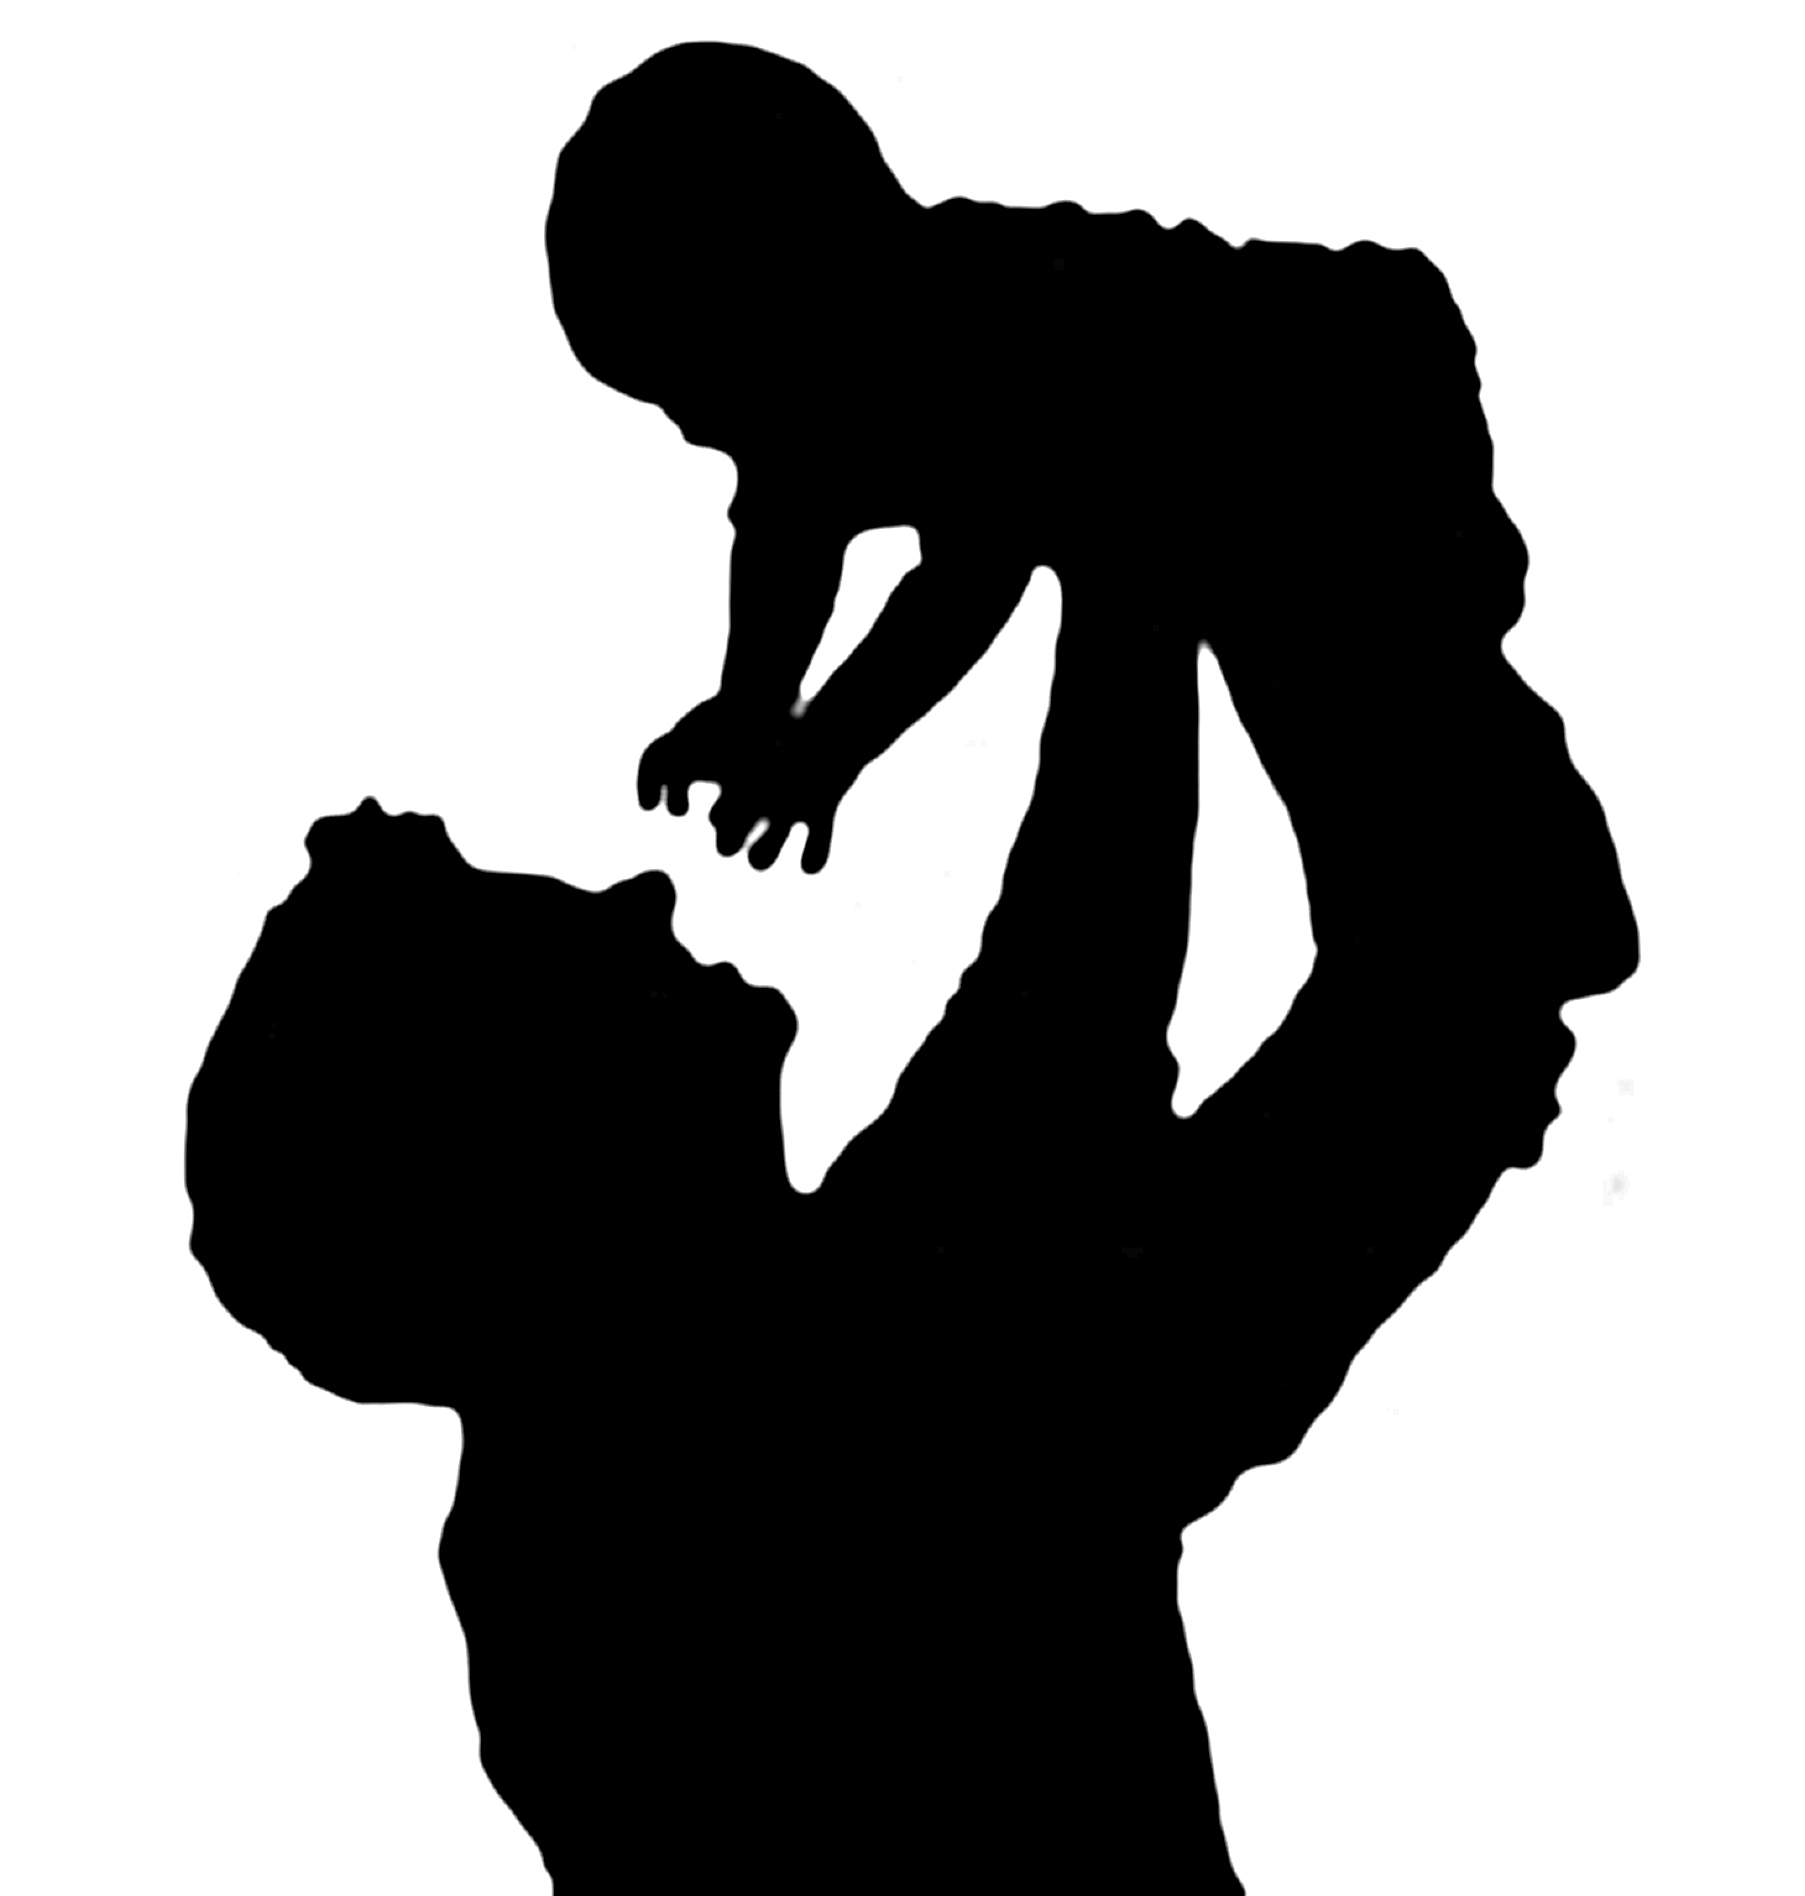 babies clipart silhouette